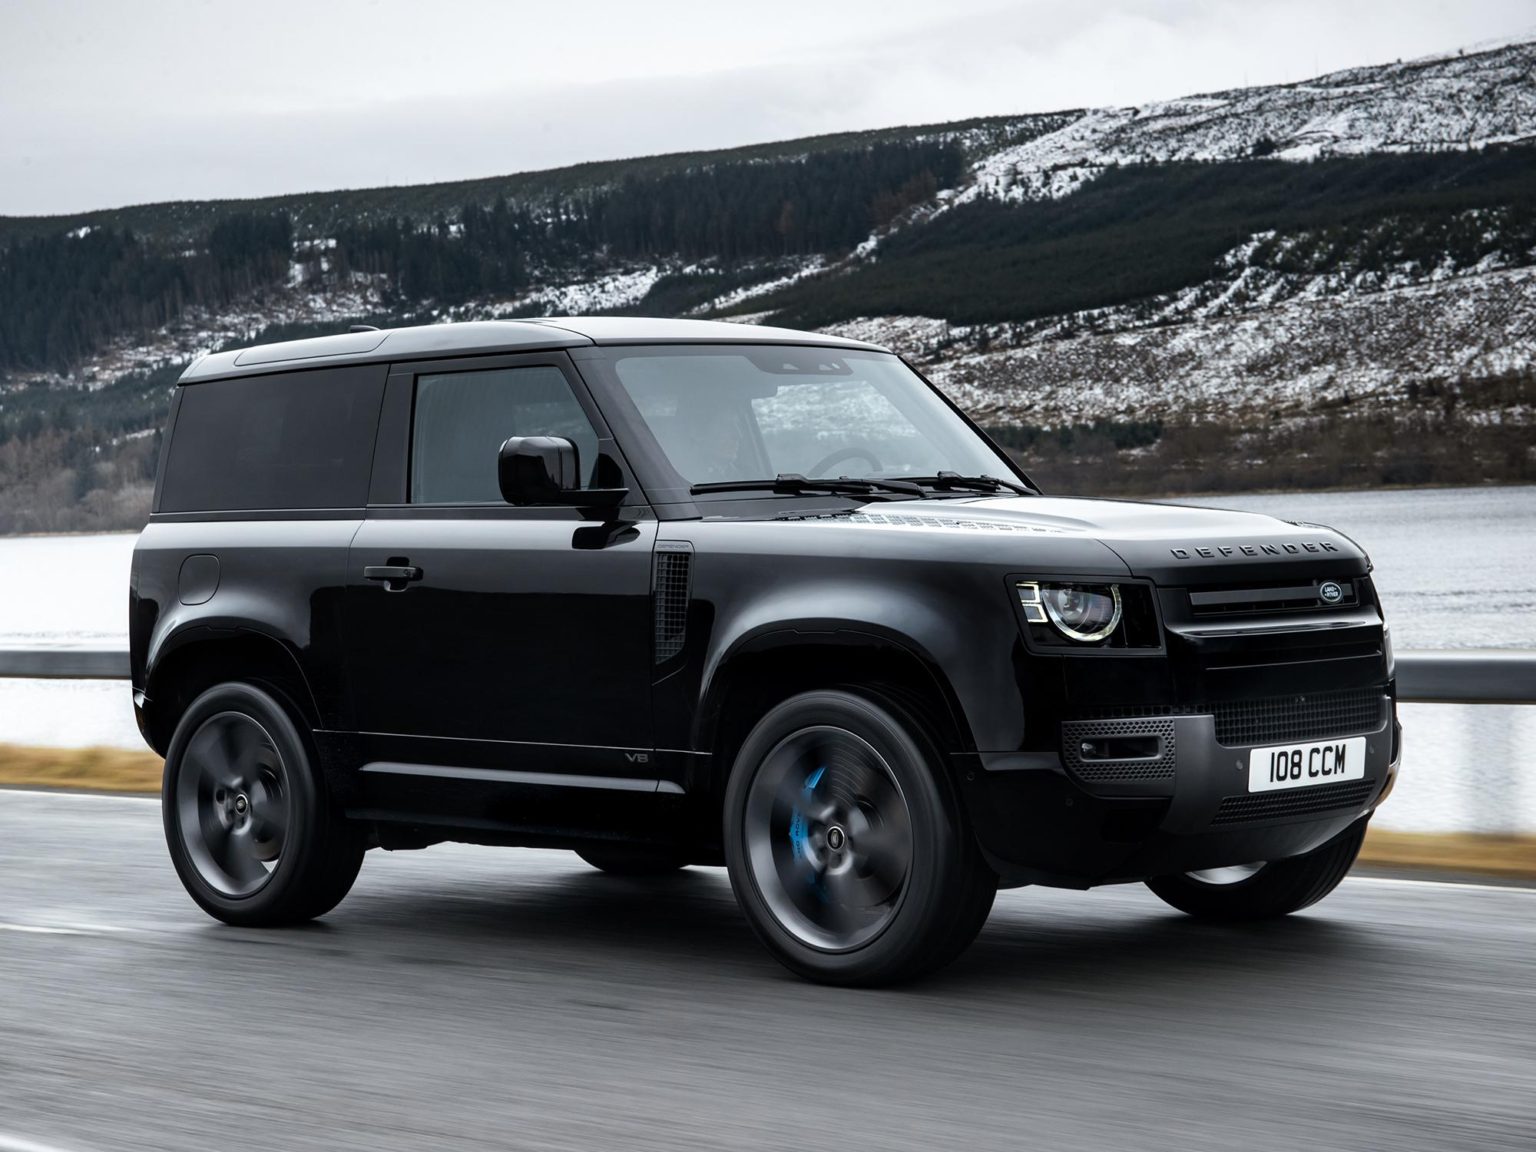 The Land Rover Defender has gotten a beefier engine option for the 2022 model year.